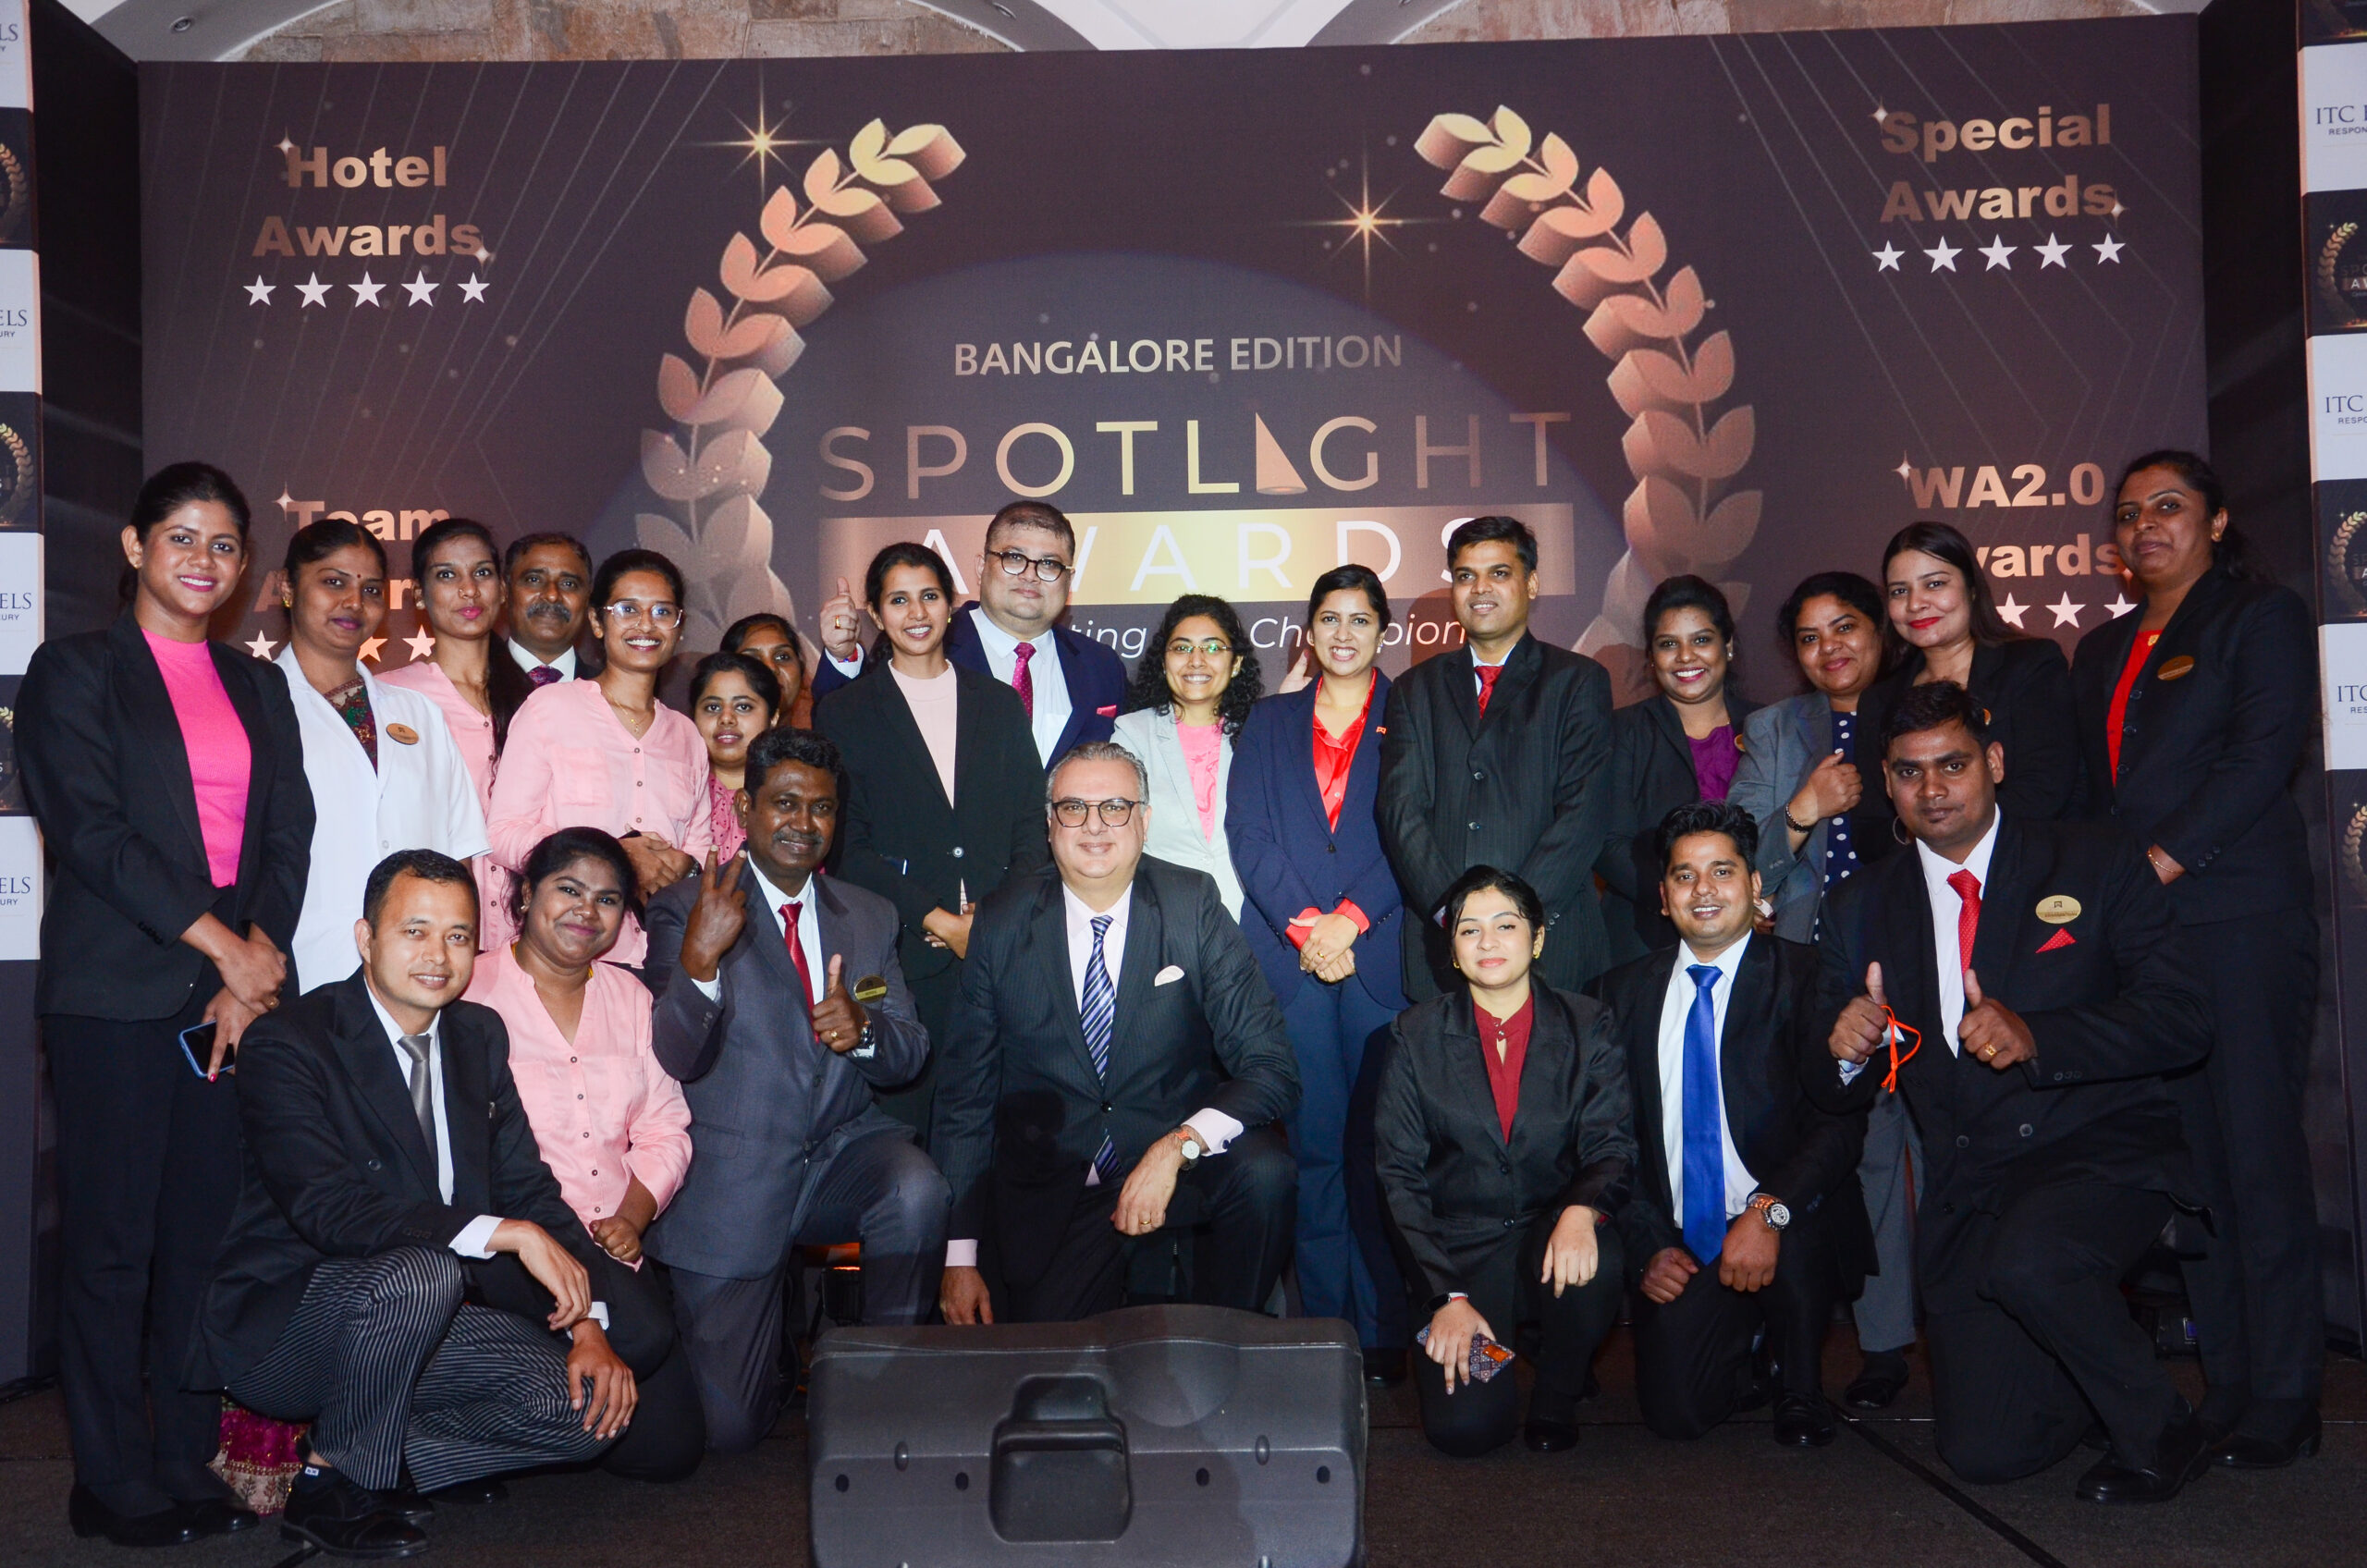 ITC Hotels South recognized and awarded 73 associates at Spotlights Awards, Bengaluru Edition